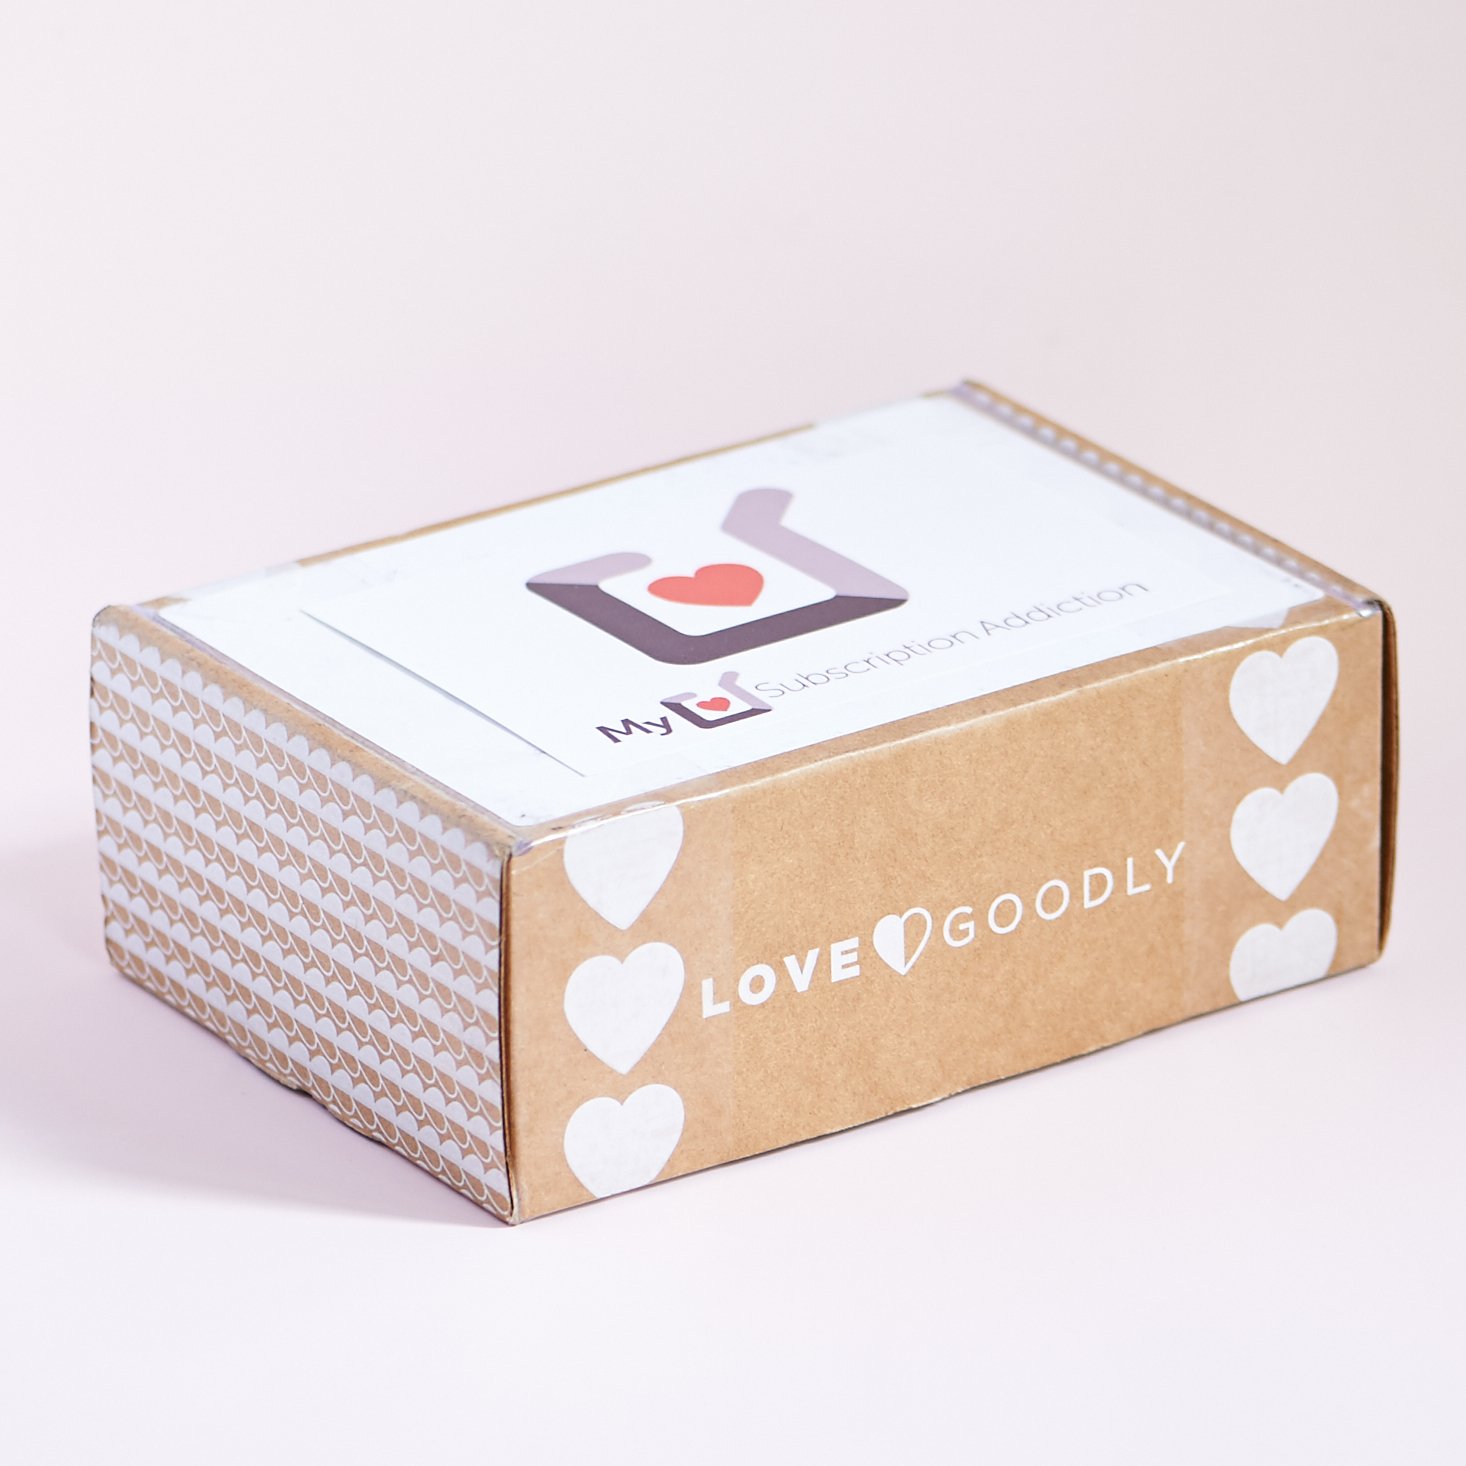 Love Goodly – Better Than Black Friday Deal!